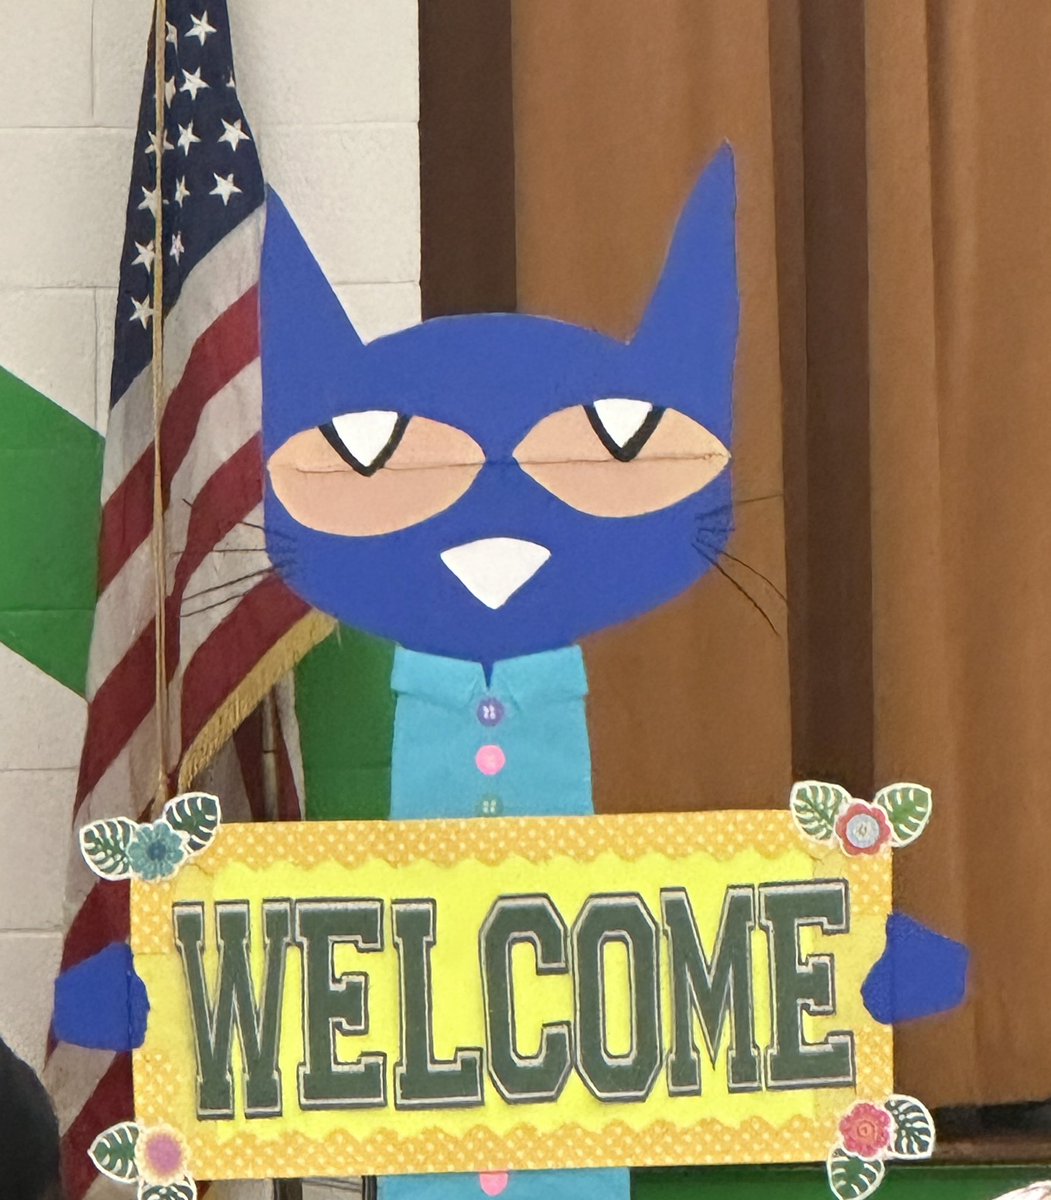 Kindergarten show @westarea_school, my elementary school, Home of the Mighty Mustangs where we make learning fun and exciting!  As Dr. Backman and Pete the Cat stated  “The finest Kindergarten team @CumberlandCoSch”. @chcatalano @mellottahill1 #CCSKShowcase23